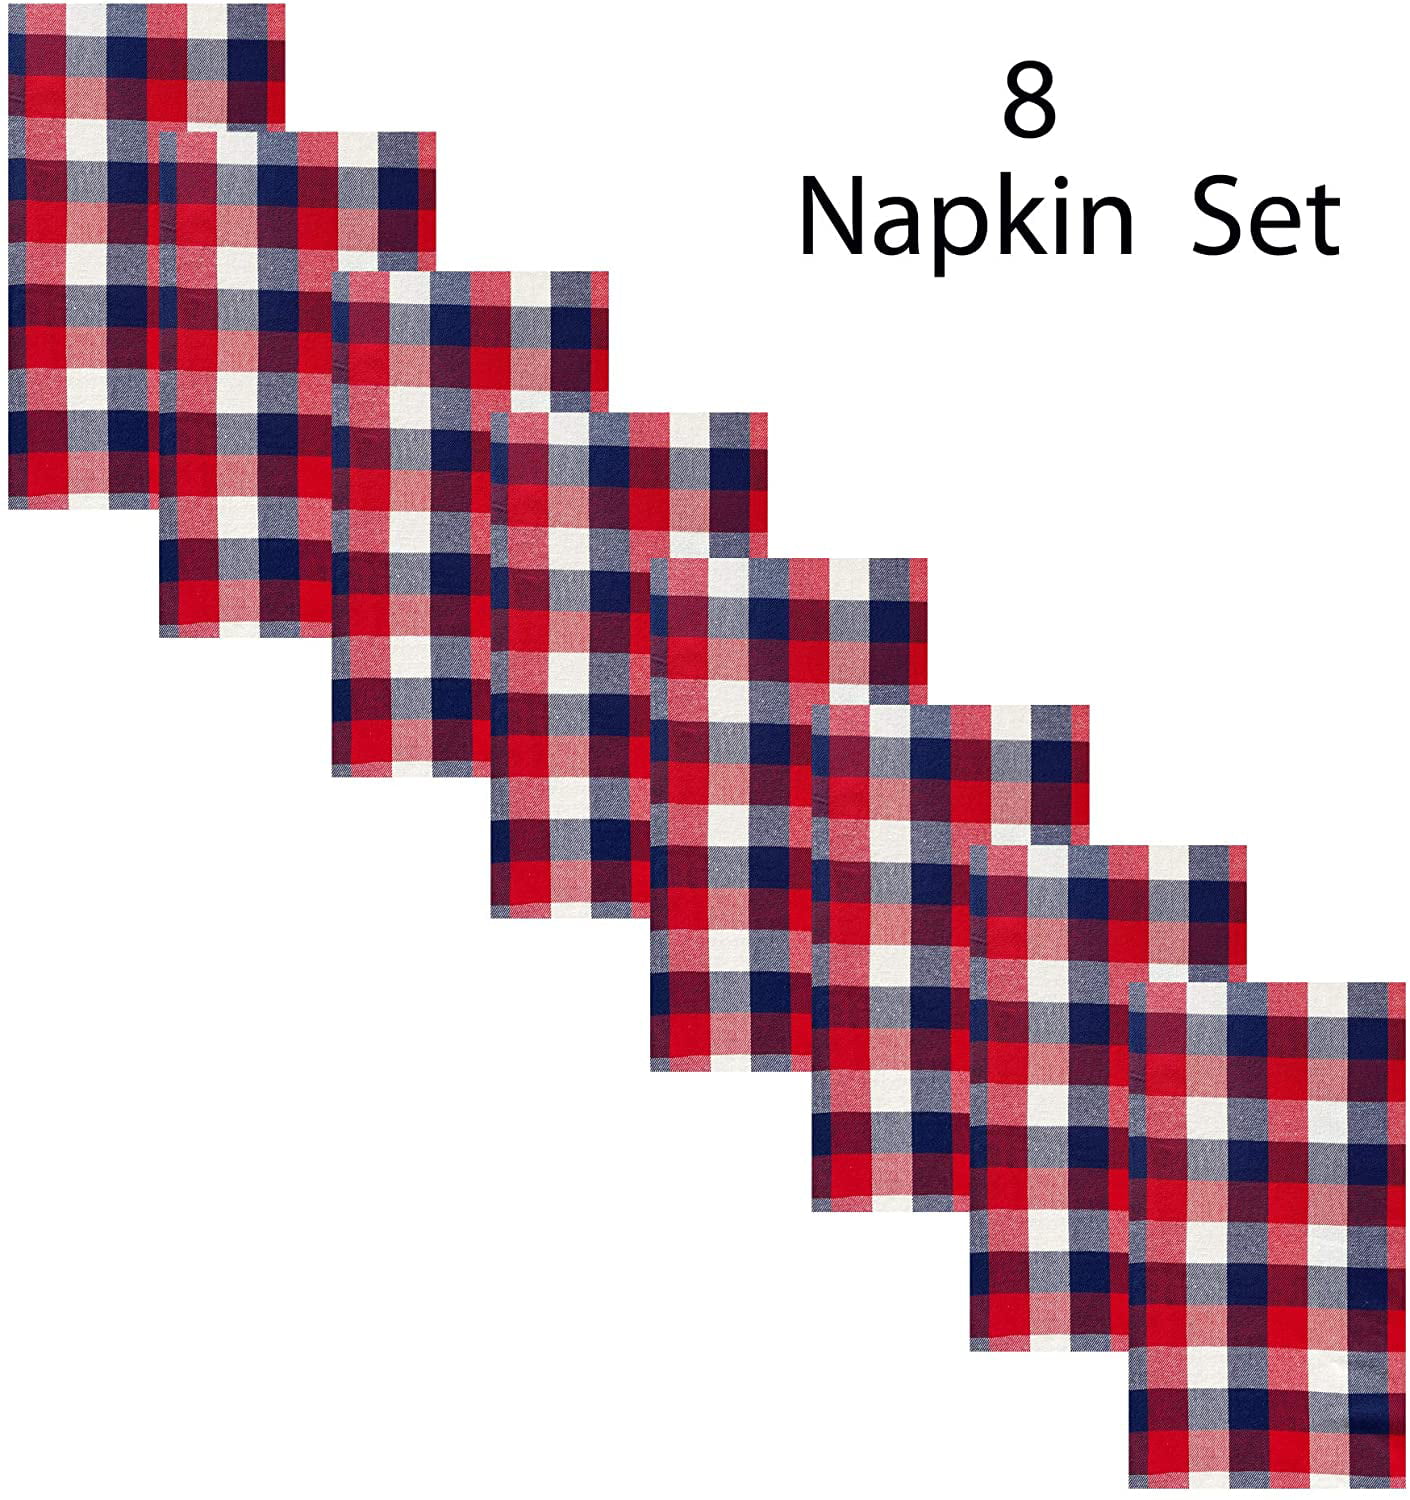 White and Blue Plaid Cotton Weave Fabric Tablecloth Indoor Outdoor Country Rustic Patriotic Woven Plaid Tablecloth Newbridge American Rustic Red 60  x 84 Oblong/Rectangle 